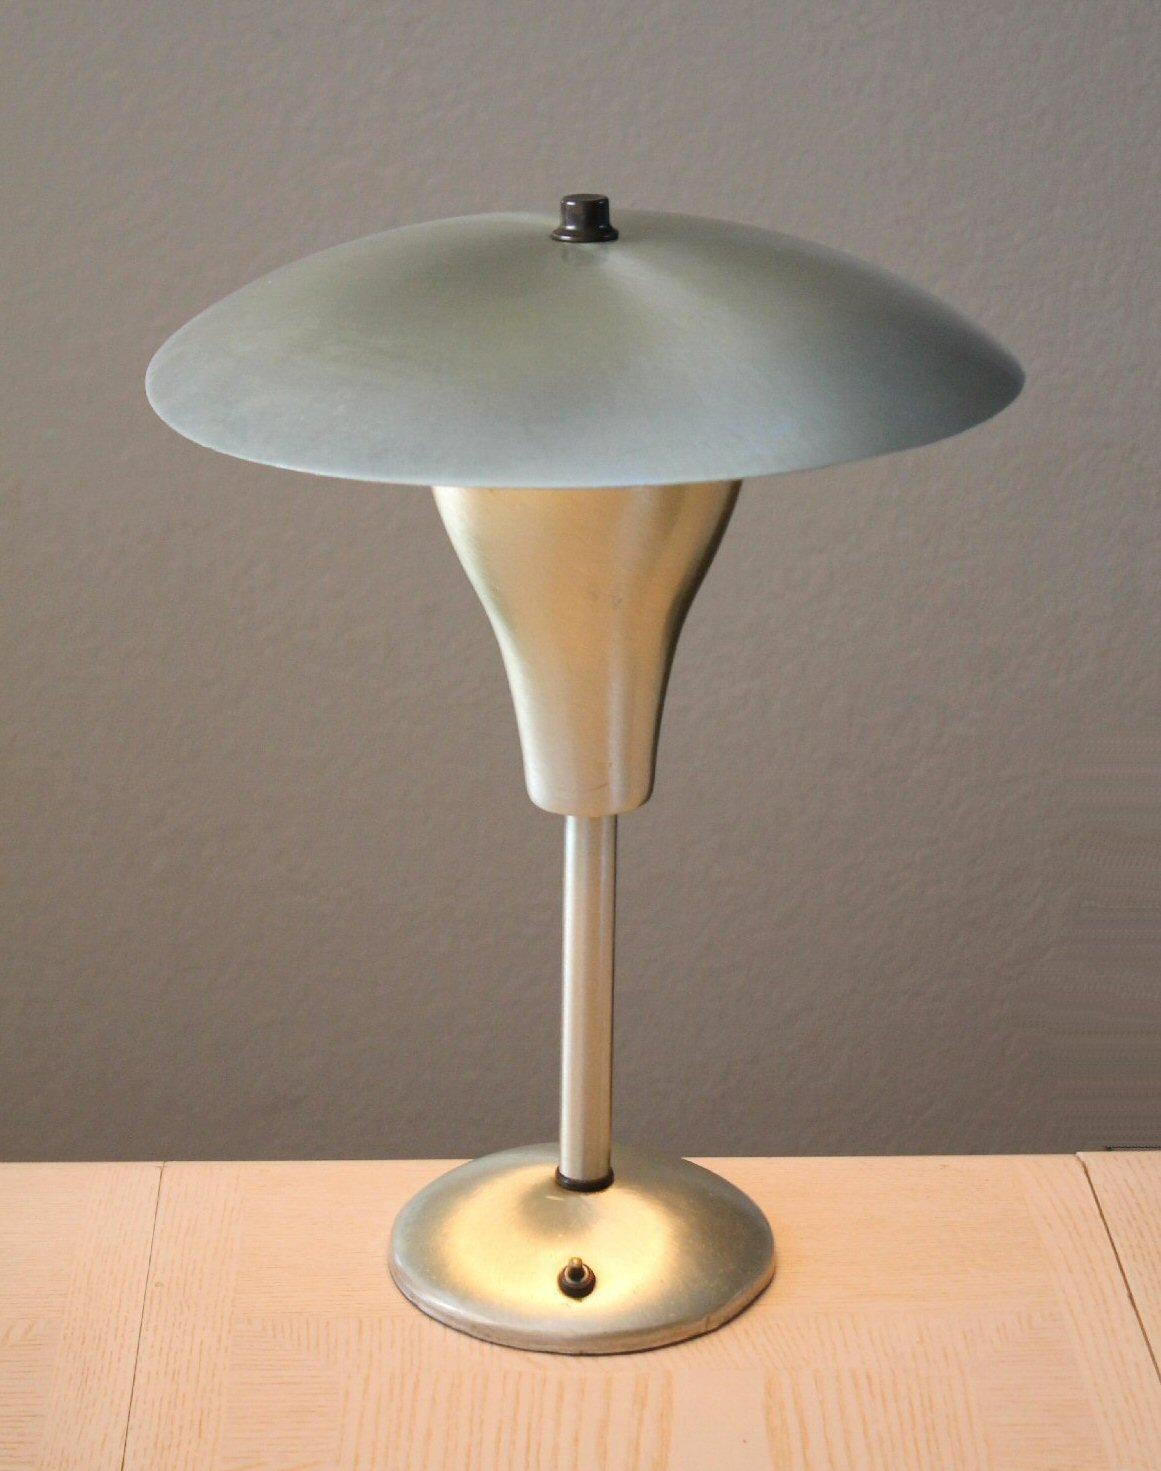  

CLEAN ART DECO STYLE!

BRUSHED ALUMINUM
SAUCER SHADE
DESK/TABLE LAMP!
 
ALL METAL REFECTOR LAMP!

SUPERB 